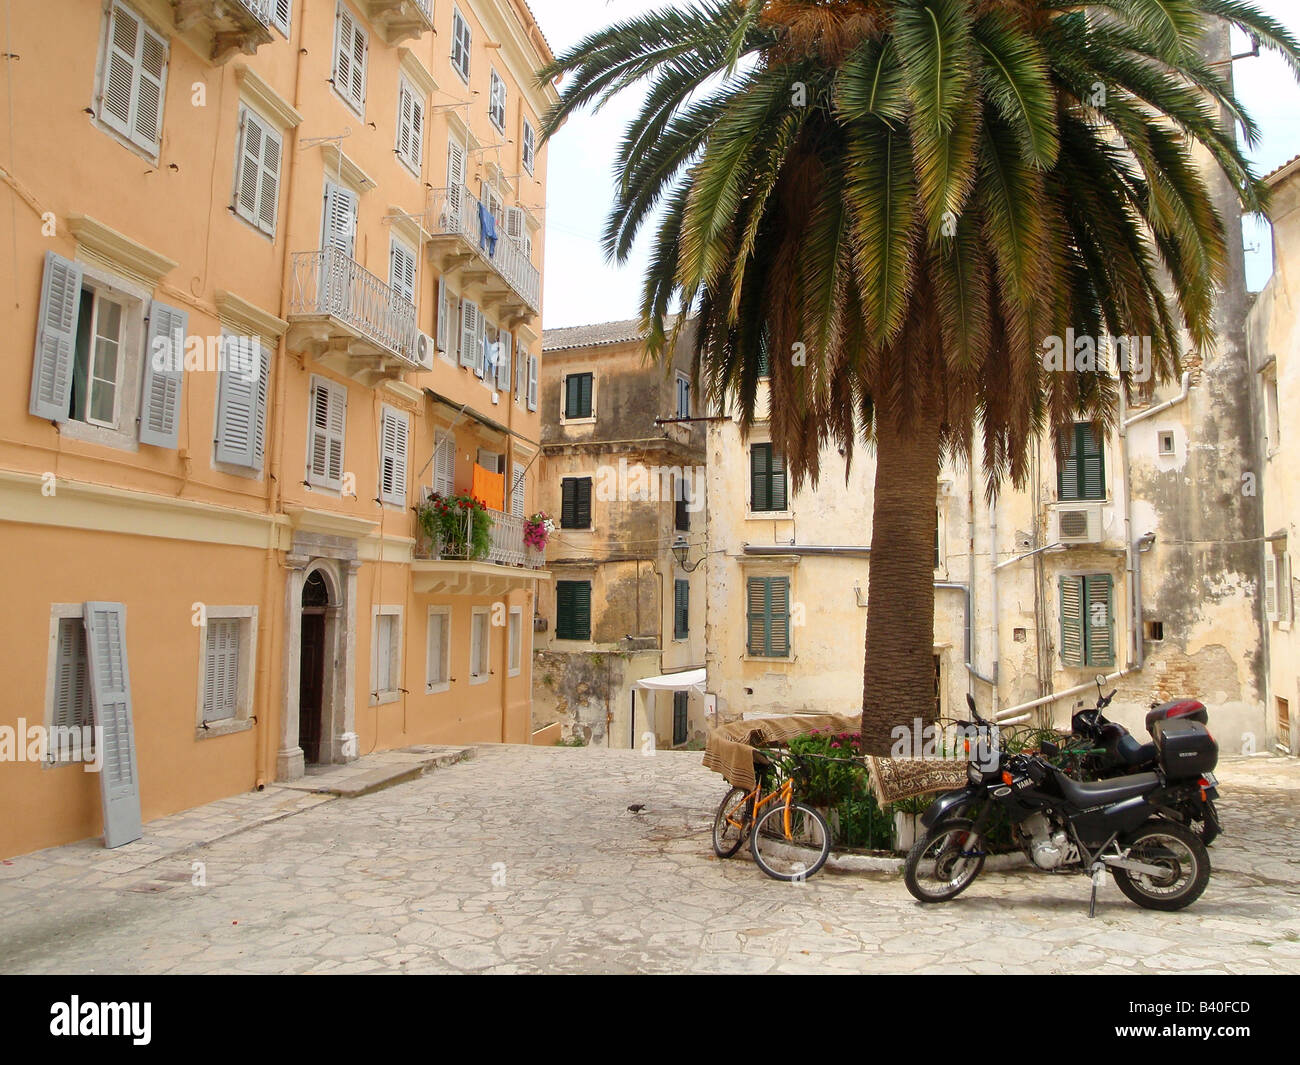 Local sights on walking the streets of Corfu Town Greece Stock Photo